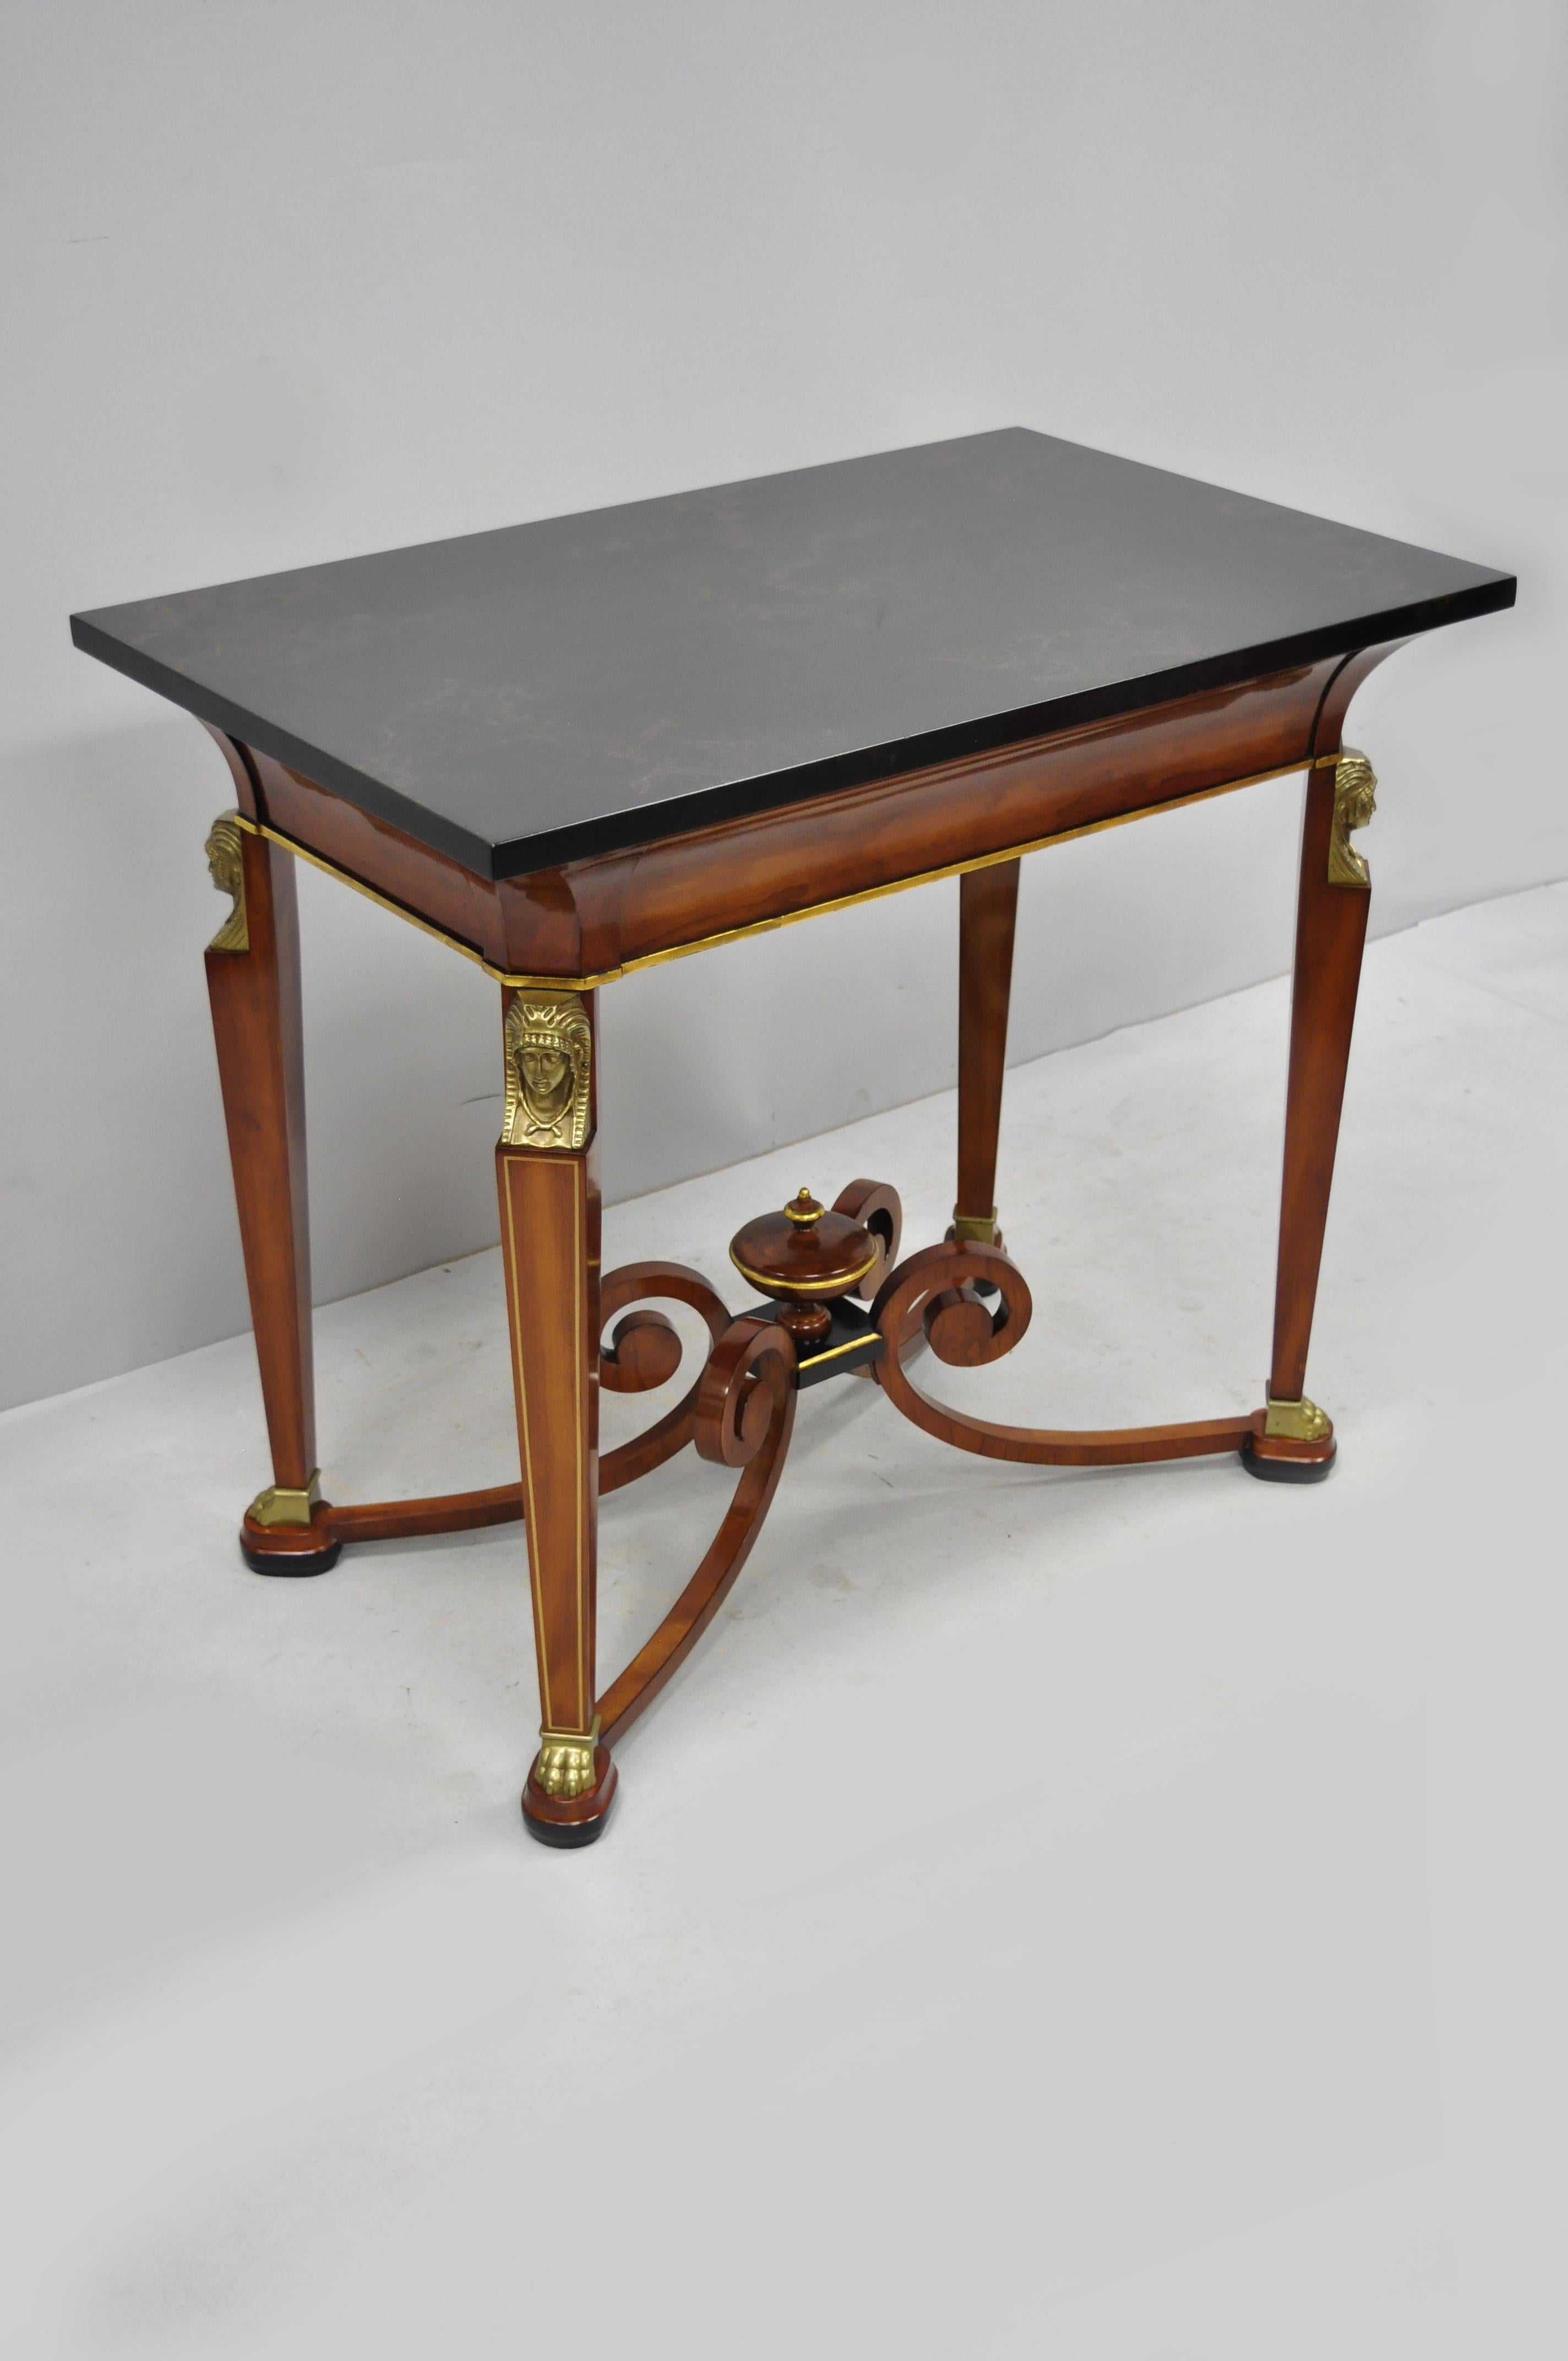 John Widdicomb French Empire figural bronze mounted occasional lamp table. Item features lacquered faux marble top, female busts and paw feet, carved wood central urn, scrolling stretcher base, original label, quality American craftsmanship, great